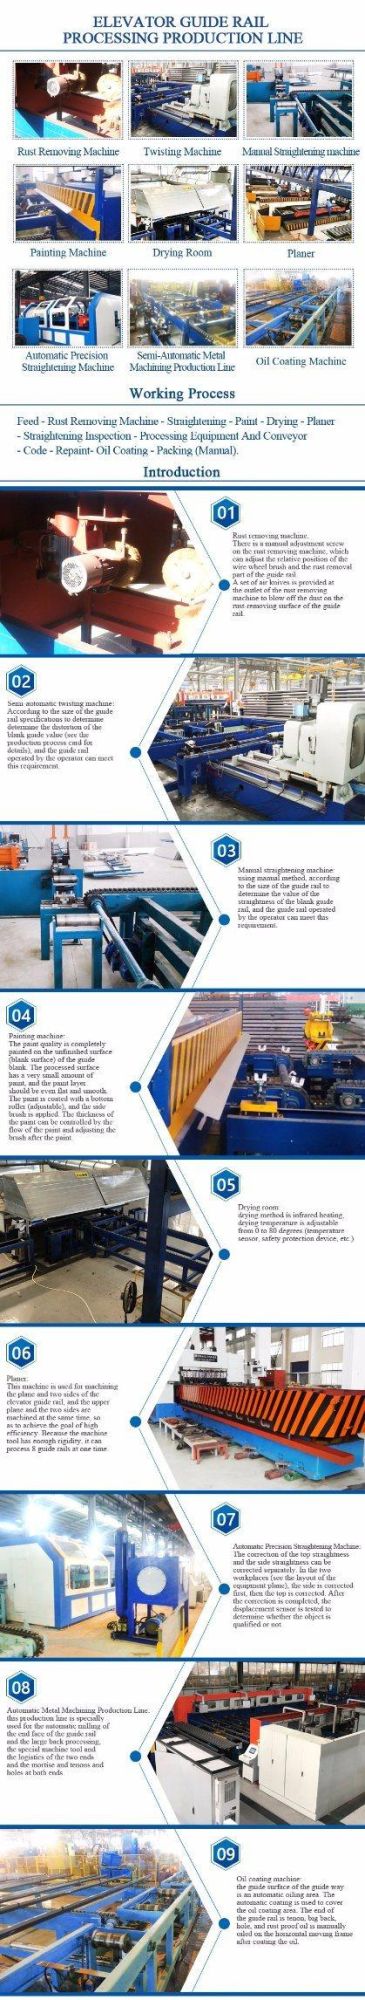 Manufacturer Making in China Galvanized Metal Elevator Guide Rail Roll Forming Machine